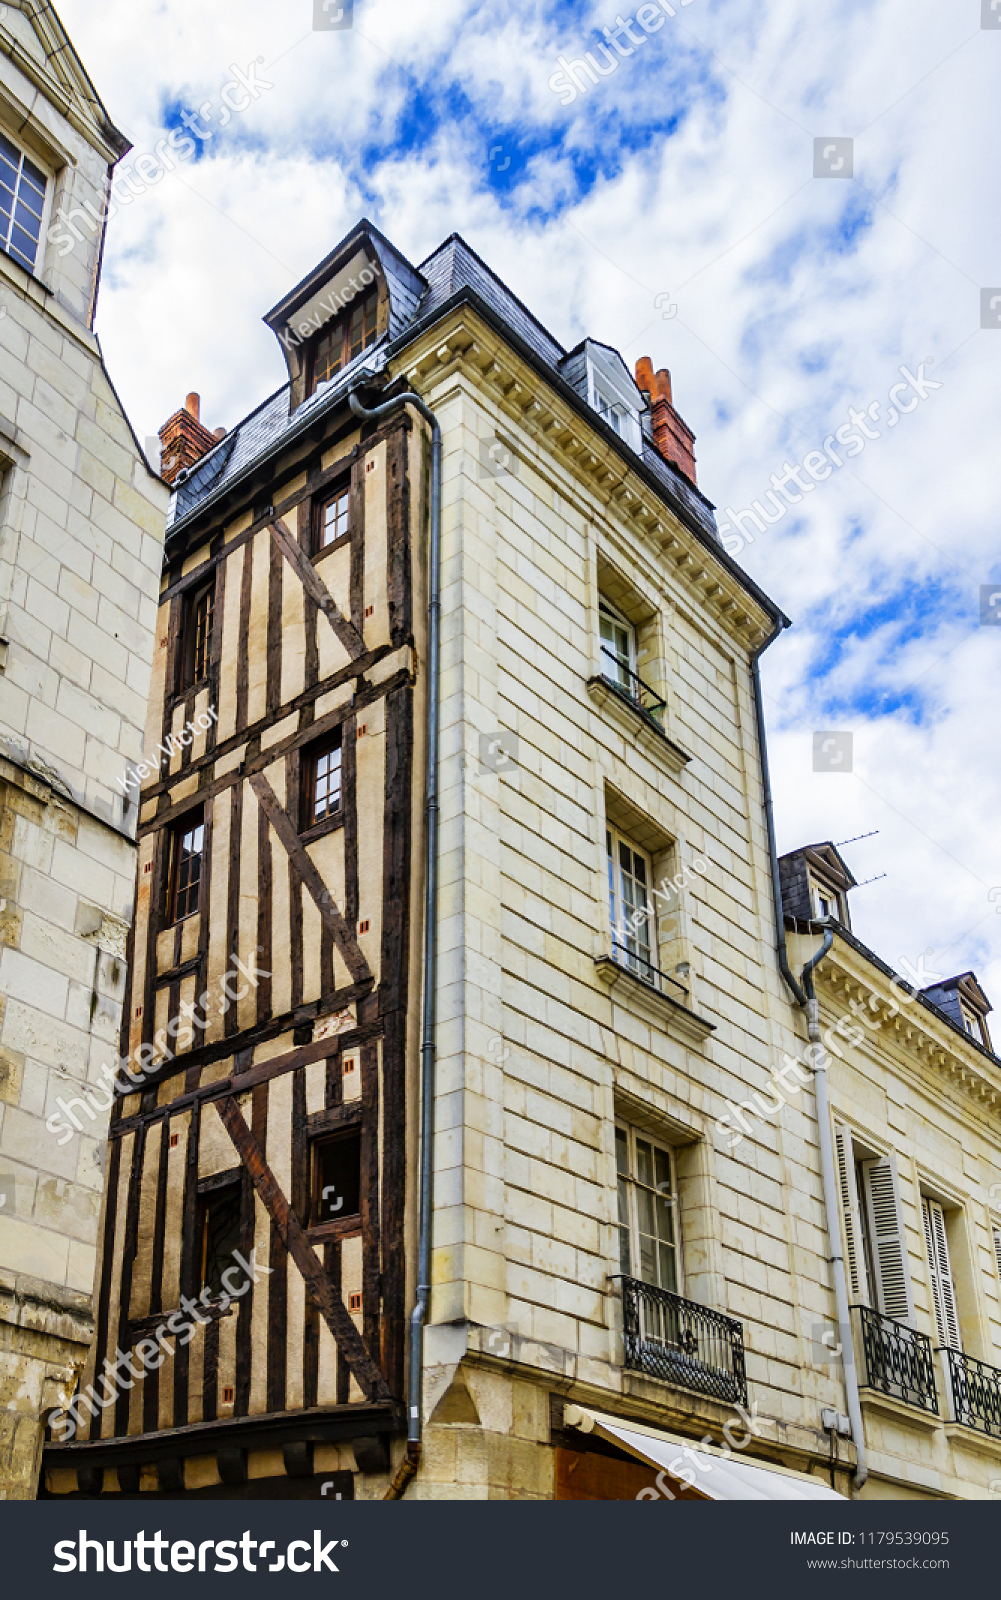 Old houses in medieval city of Tours. City Tours is UNESCO World Heritage Site. Tours - city in central France, capital of the Indre-et-Loire department. France. #1179539095